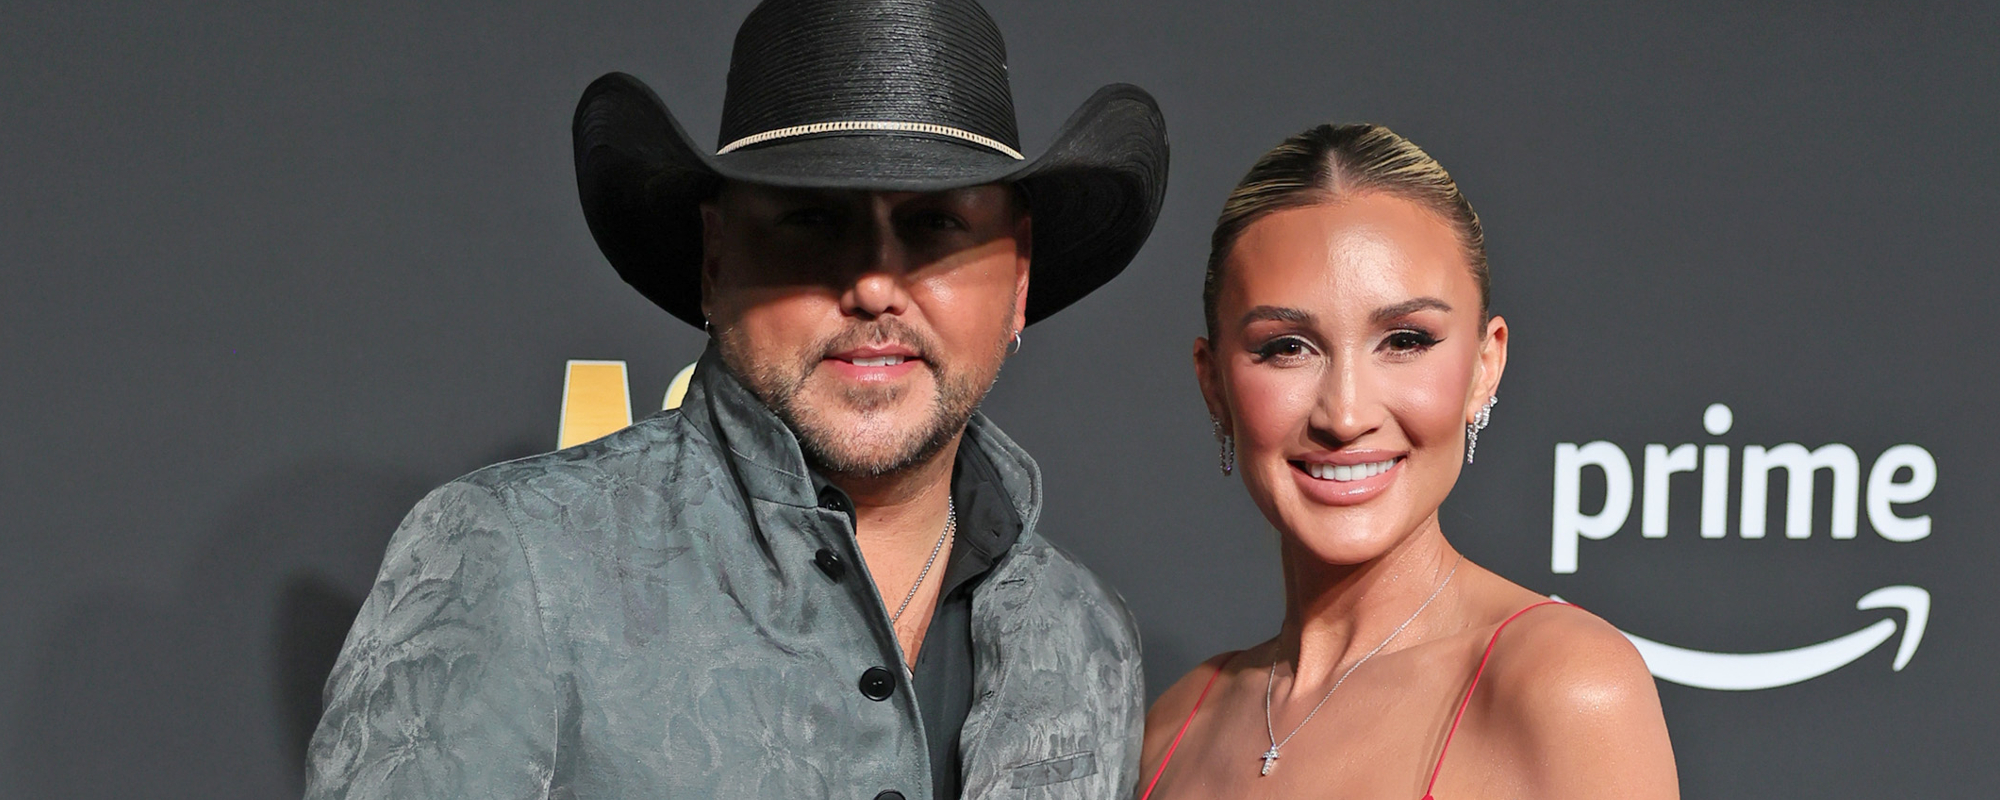 Jason Aldean’s Wife Brittany Shares Injuries She Received While on Vacation With Family